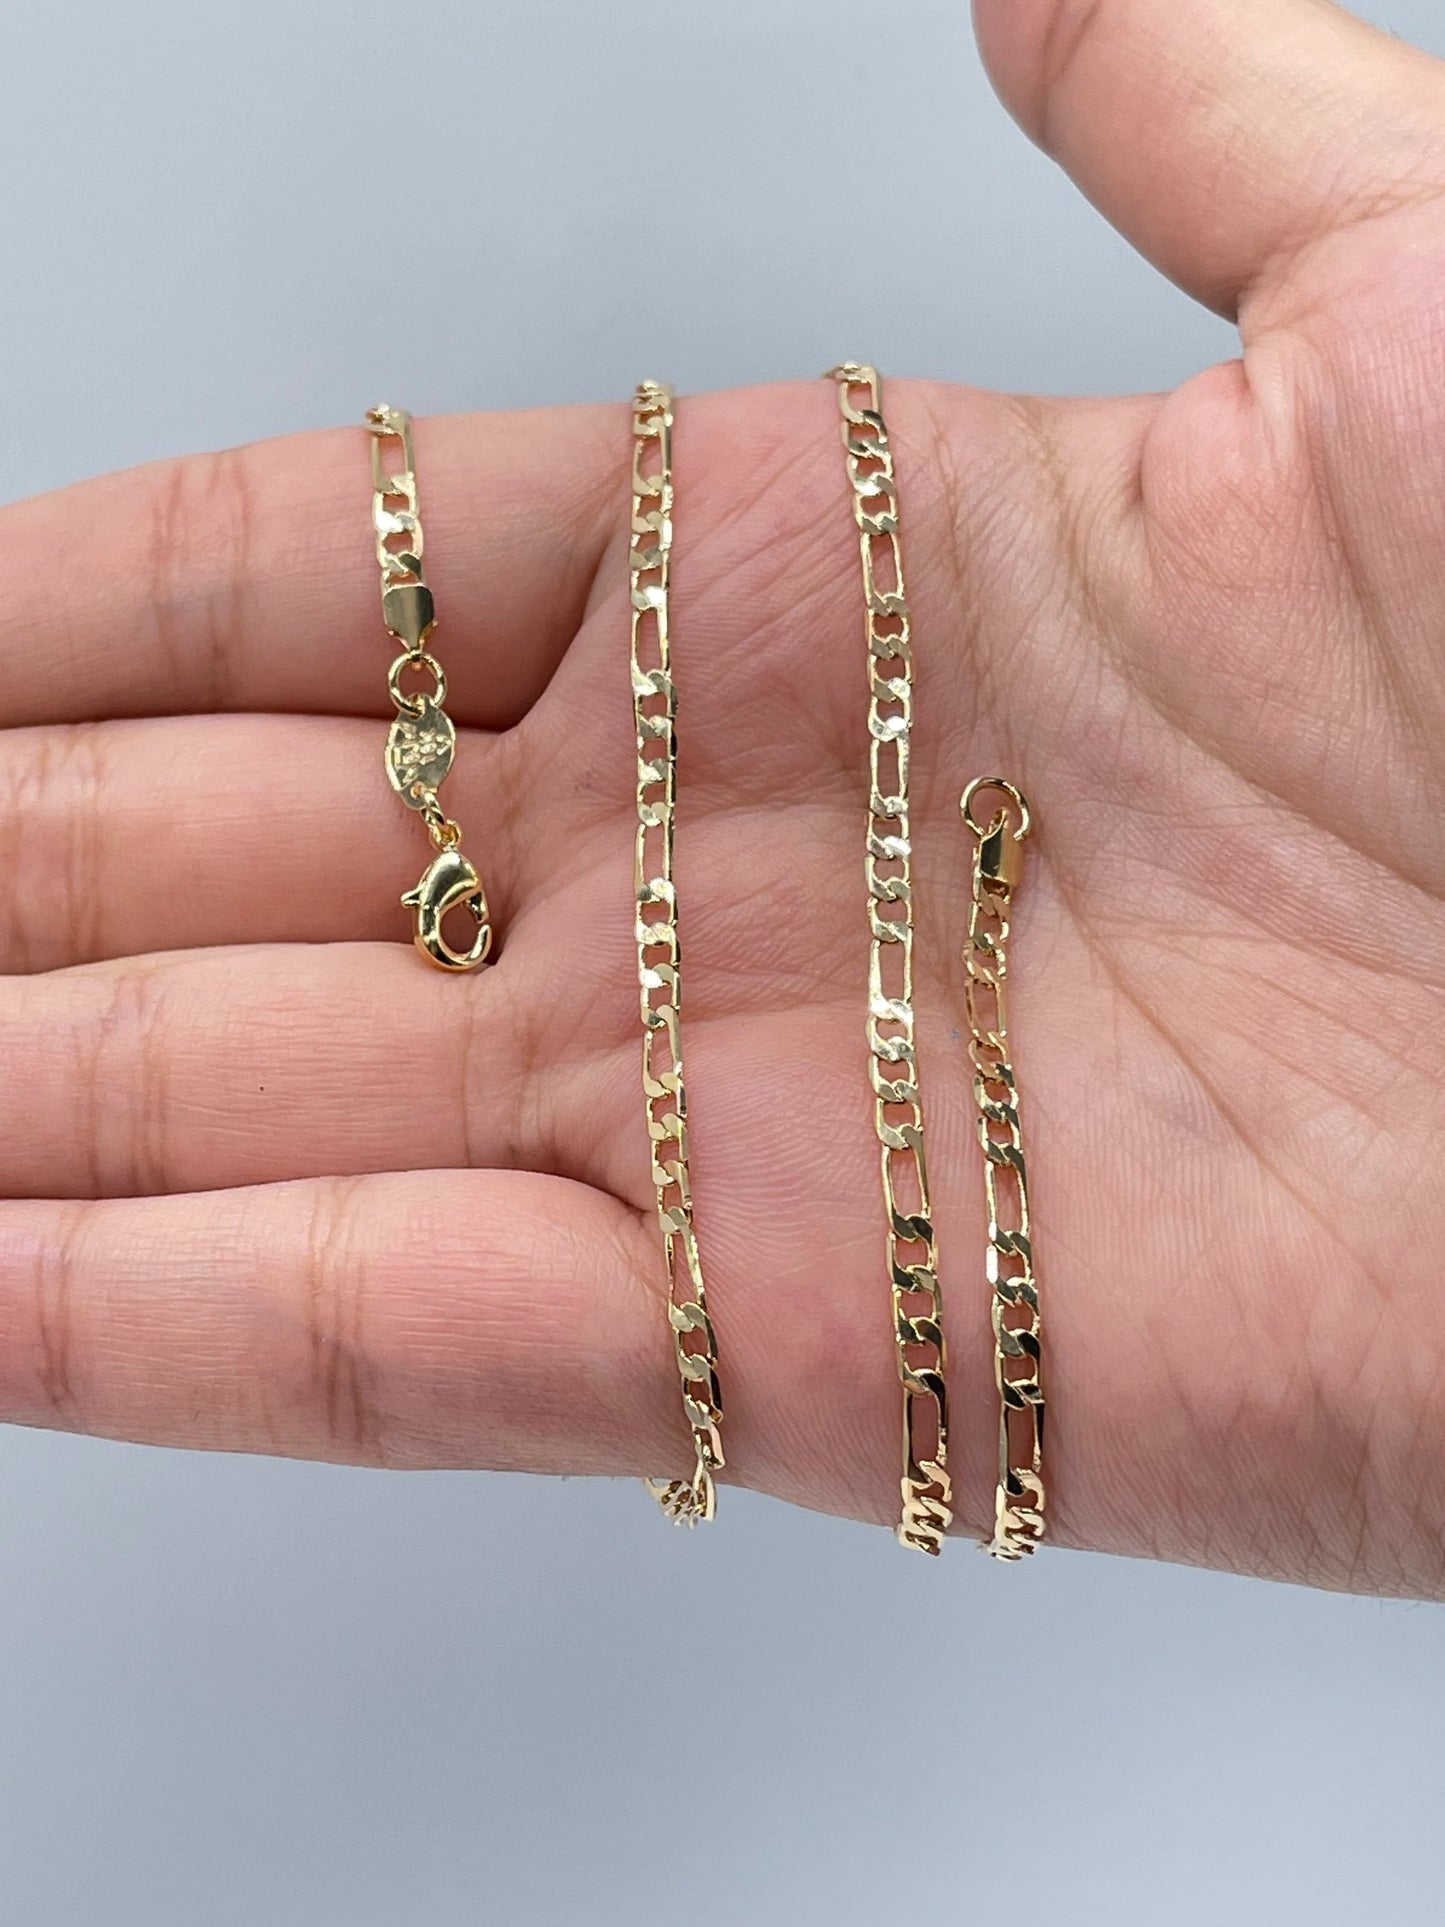 18k Gold Filled 3mm Figaro Link Chain  Necklace And Jewelry Supplies